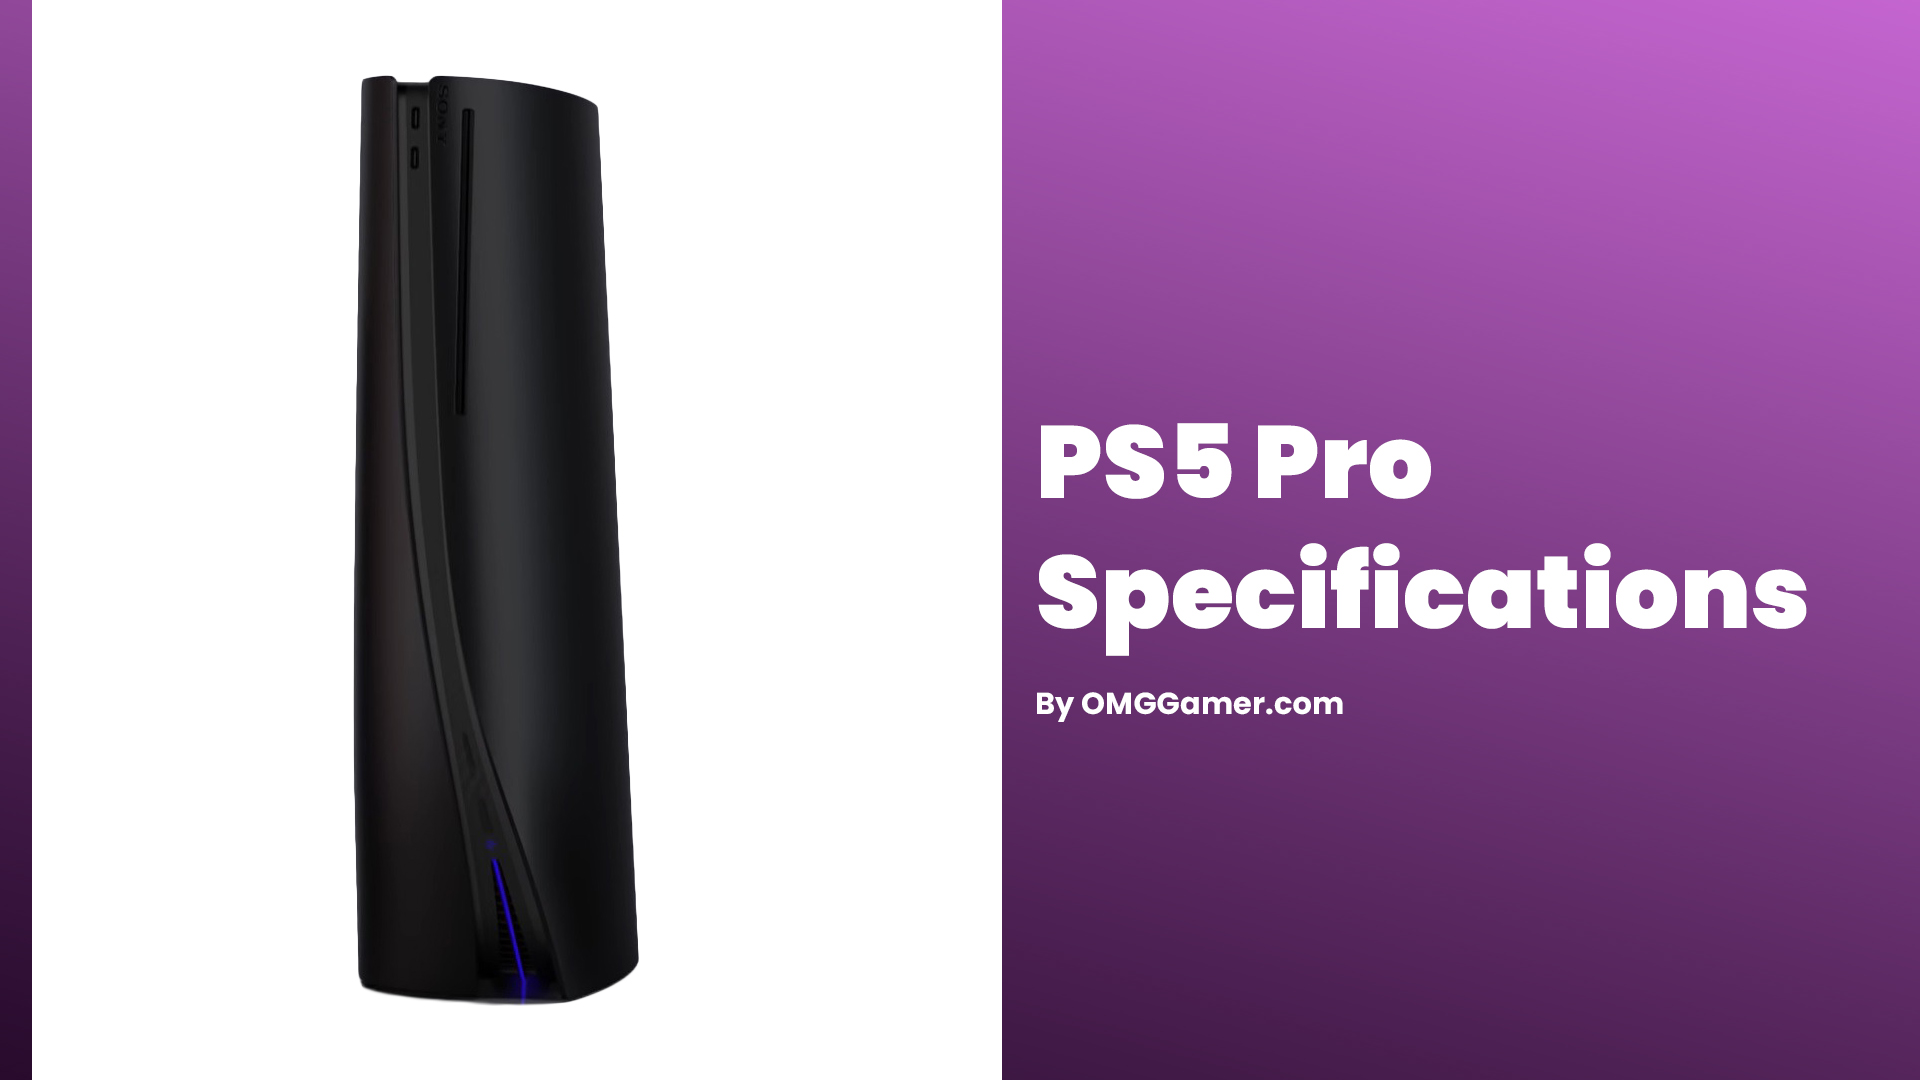 PS5 Pro Specifications